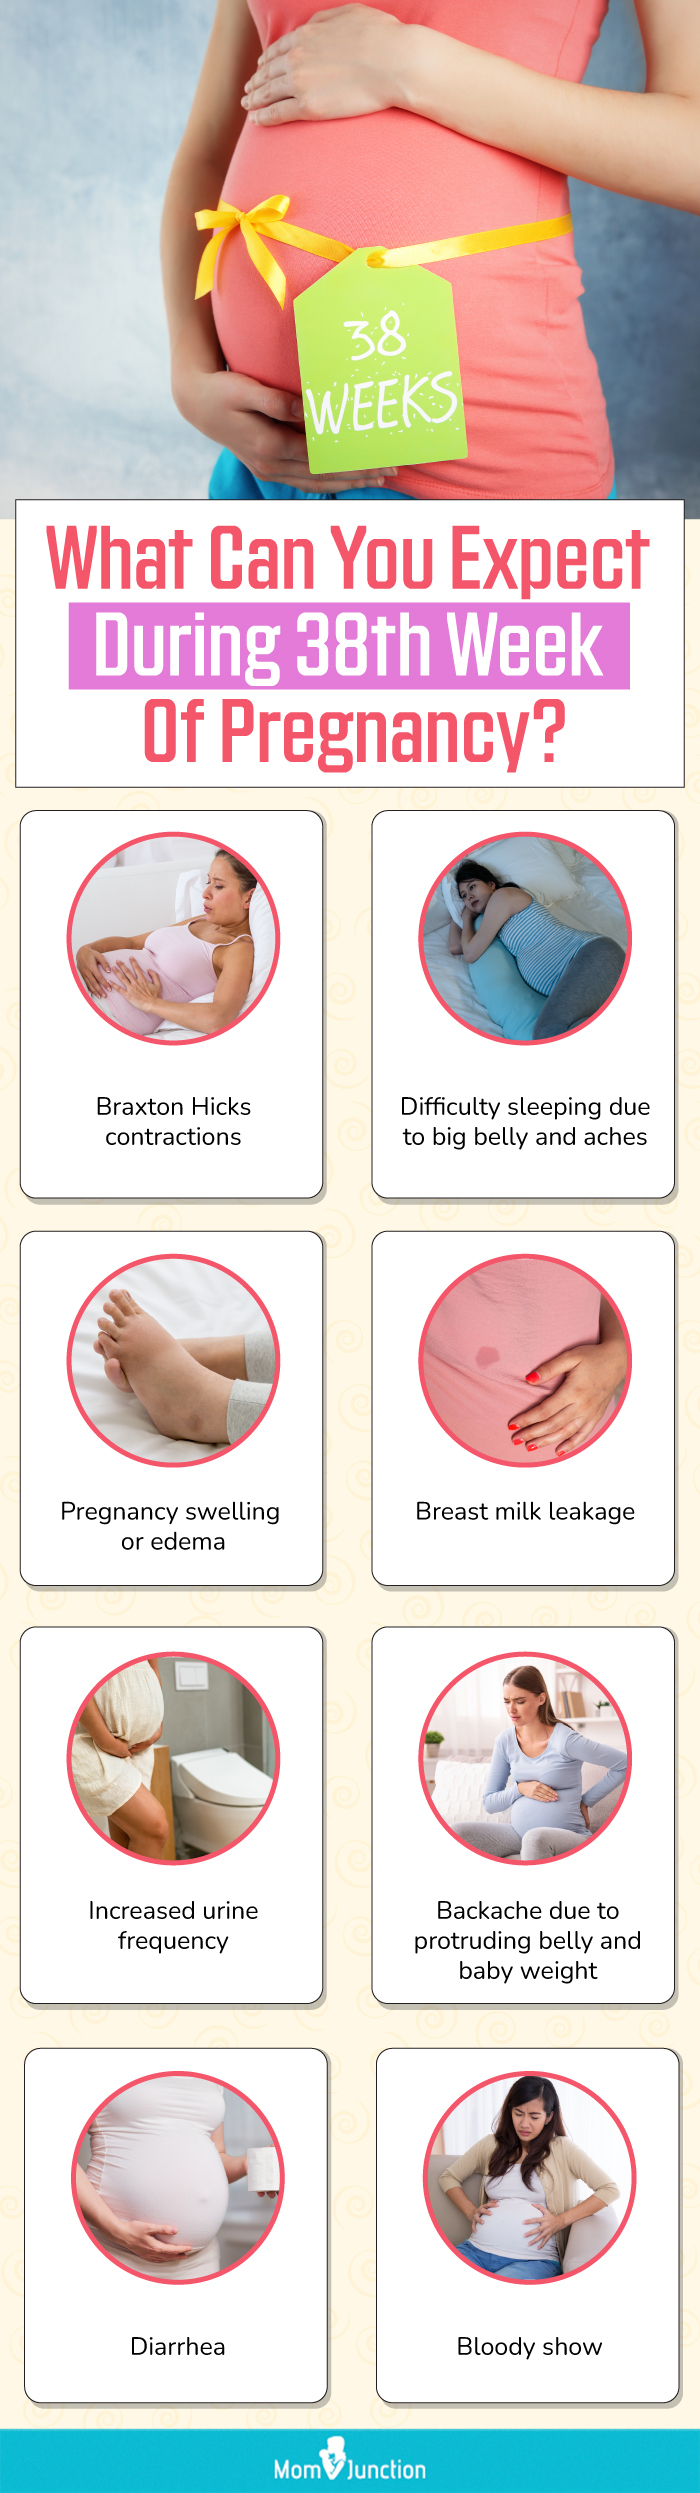 what can you expect during 38th week of pregnancy (infographic)